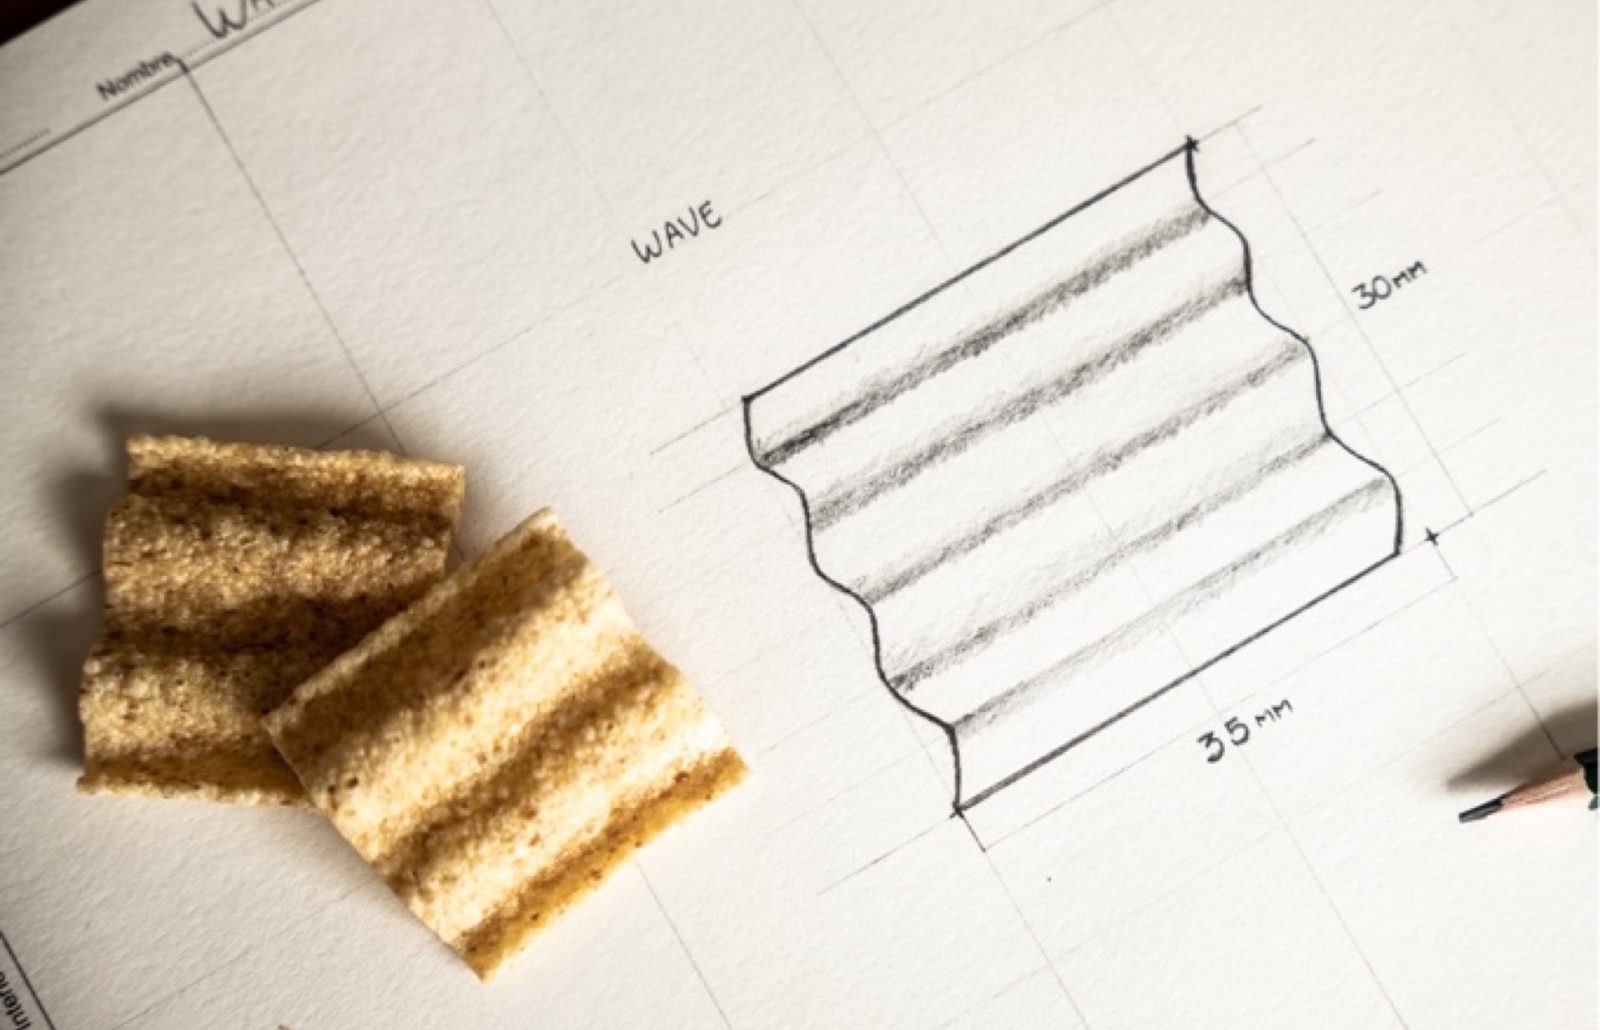 Two chips next to a pencil drawing of the same type of chips with the dimensions 35mm by 30mm specified.